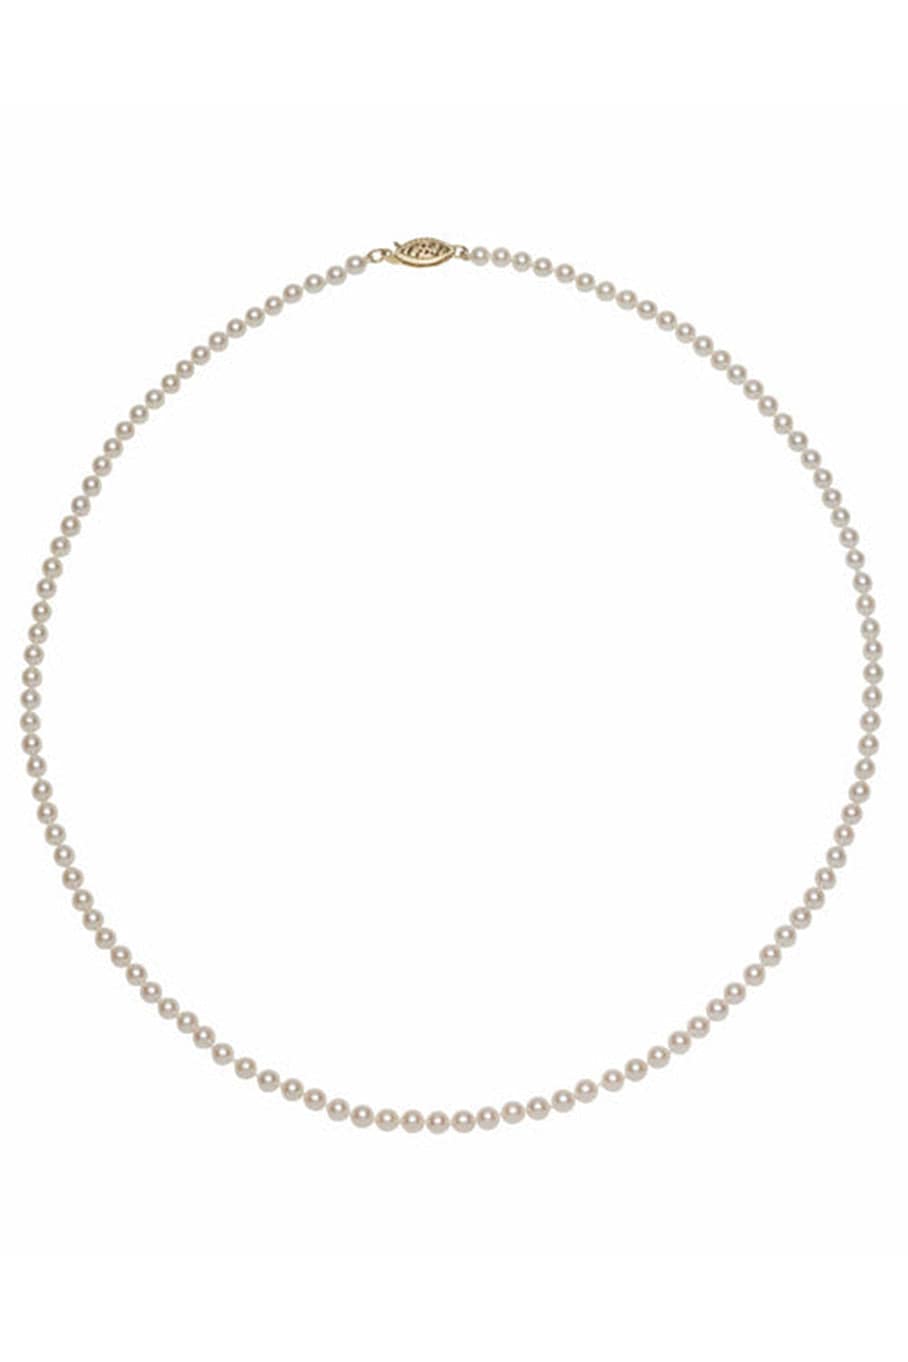 Akoya Pearl Necklace - 4mm - Yellow Gold